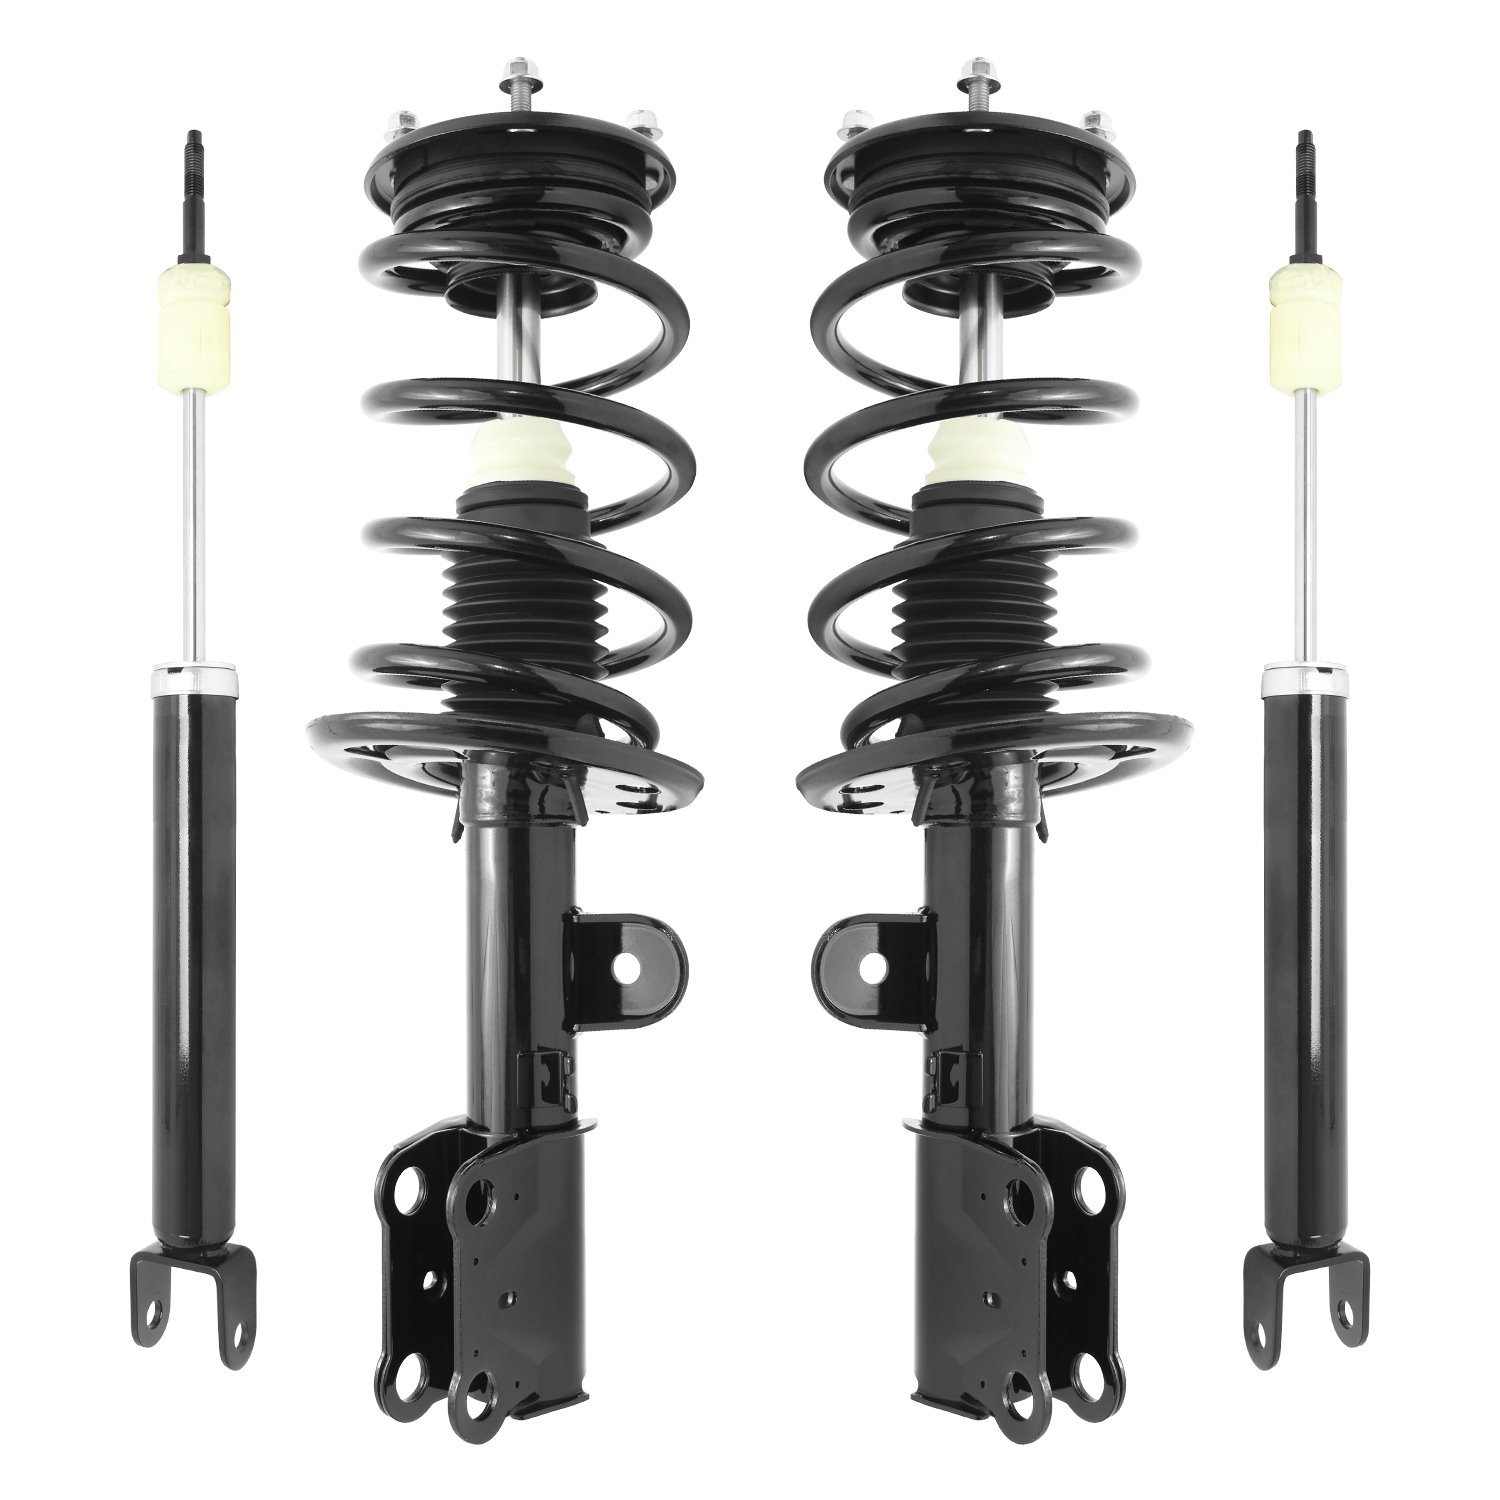 4-11547-252130-001 Front & Rear Suspension Strut & Coil Spring Assembly Fits Select Ford Taurus